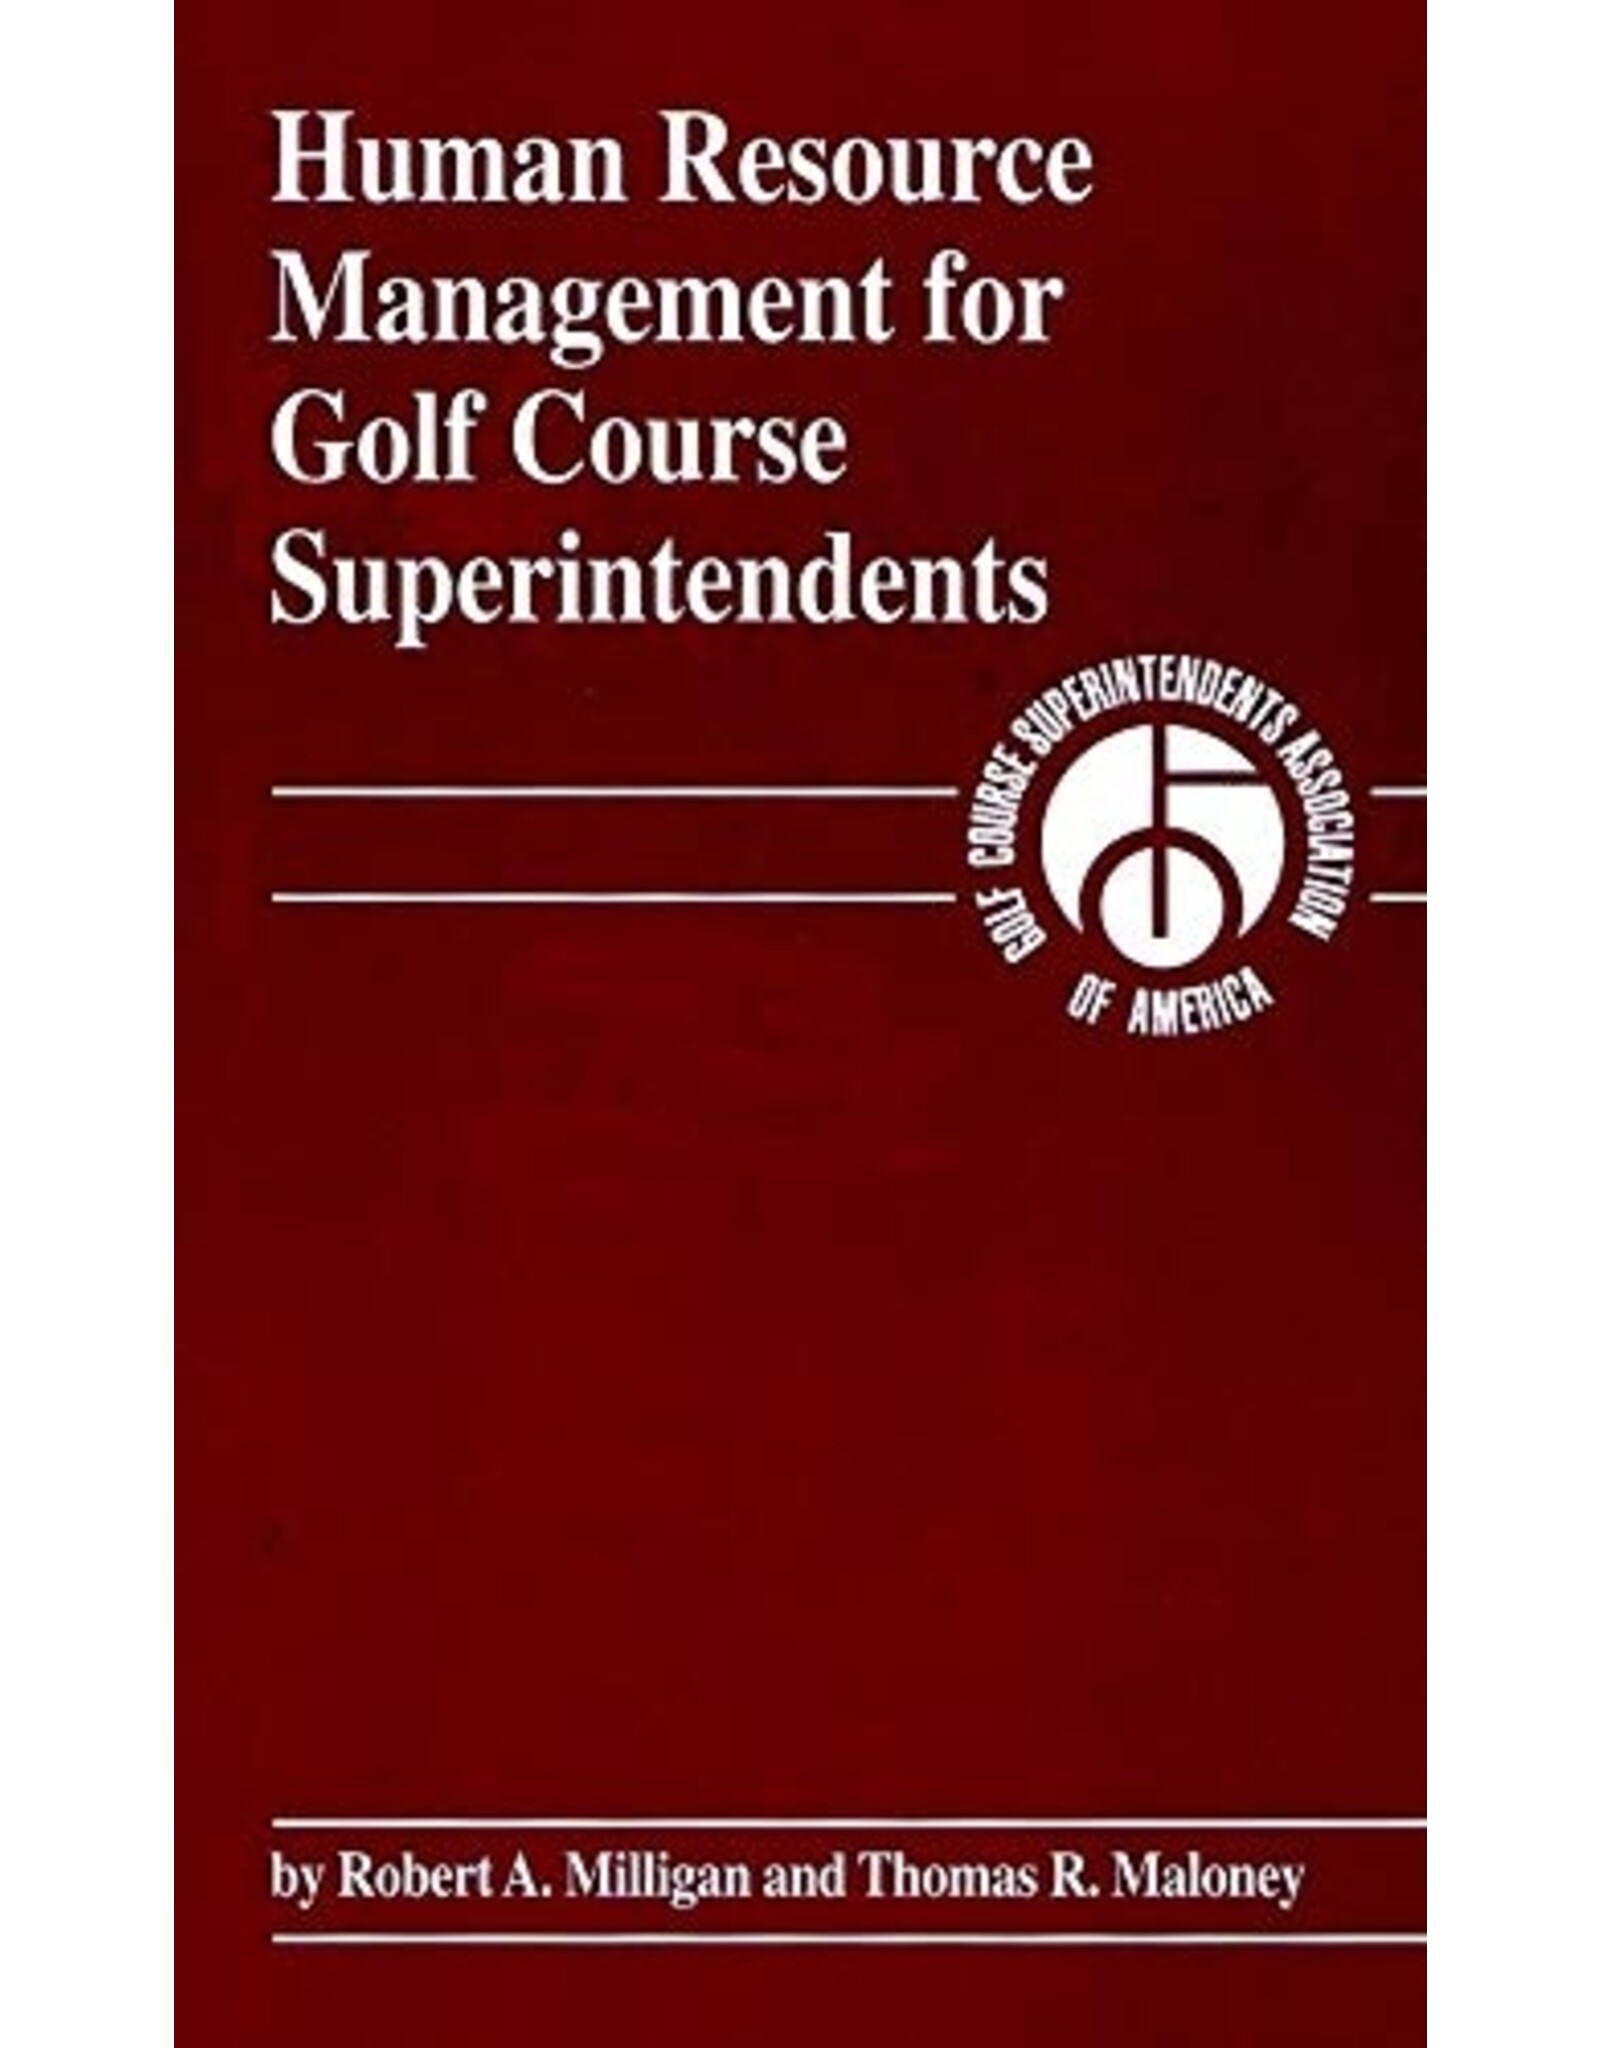 Human Resource Management for GC Superintendents